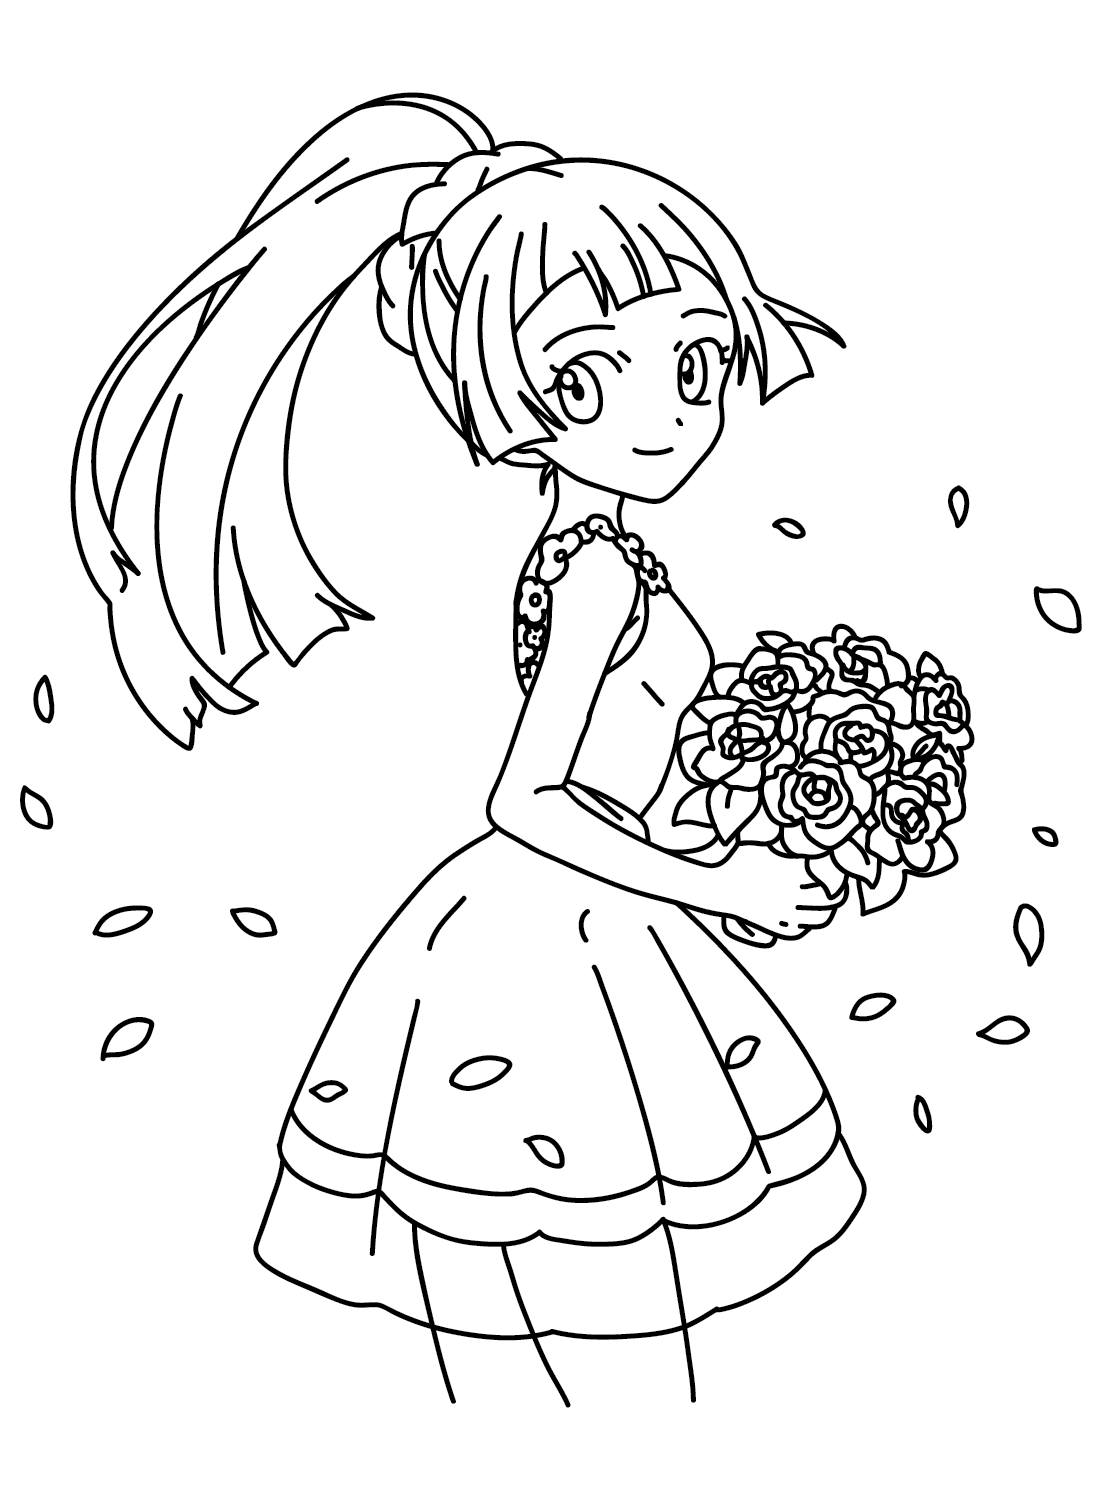 Lillie Pokemon Coloring Page to Print from Lillie Pokemon